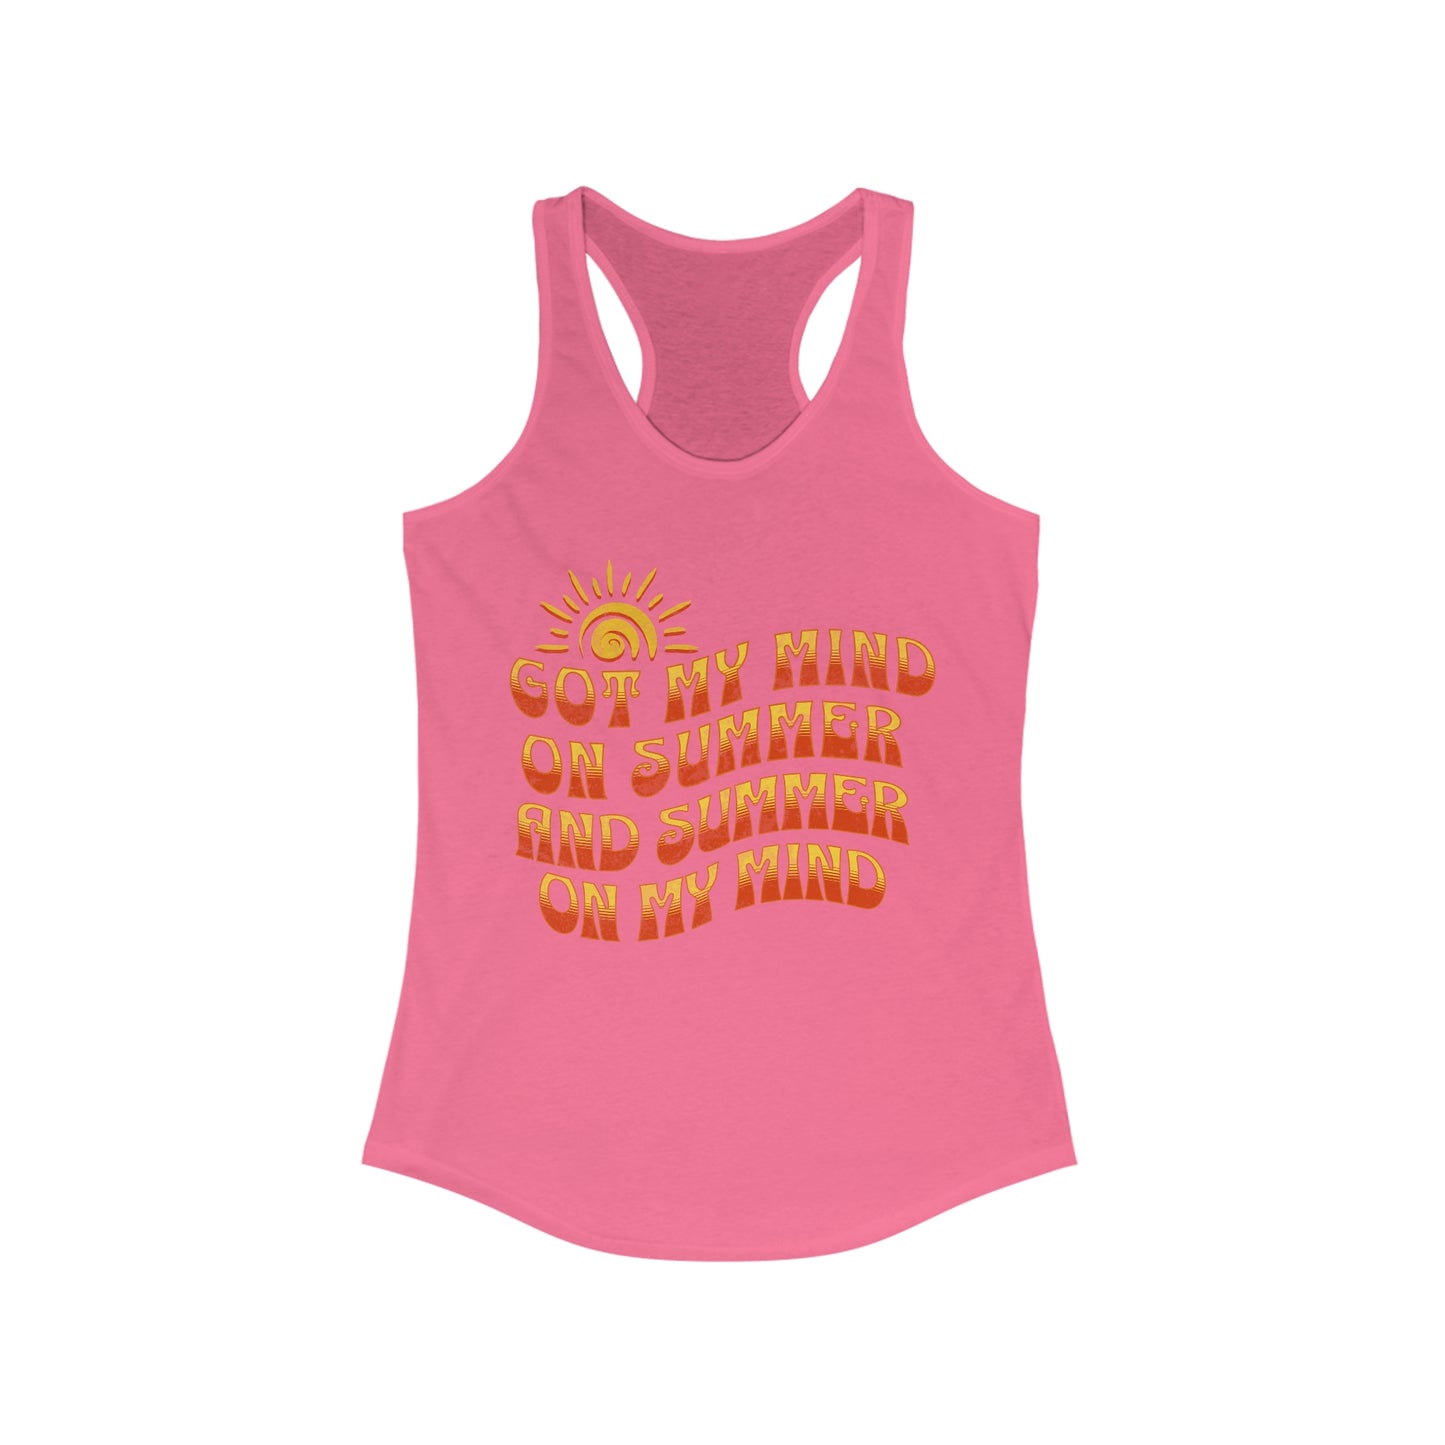 Got My Mind On Summer and Summer On My Mind - Women's Ideal Racerback Tank